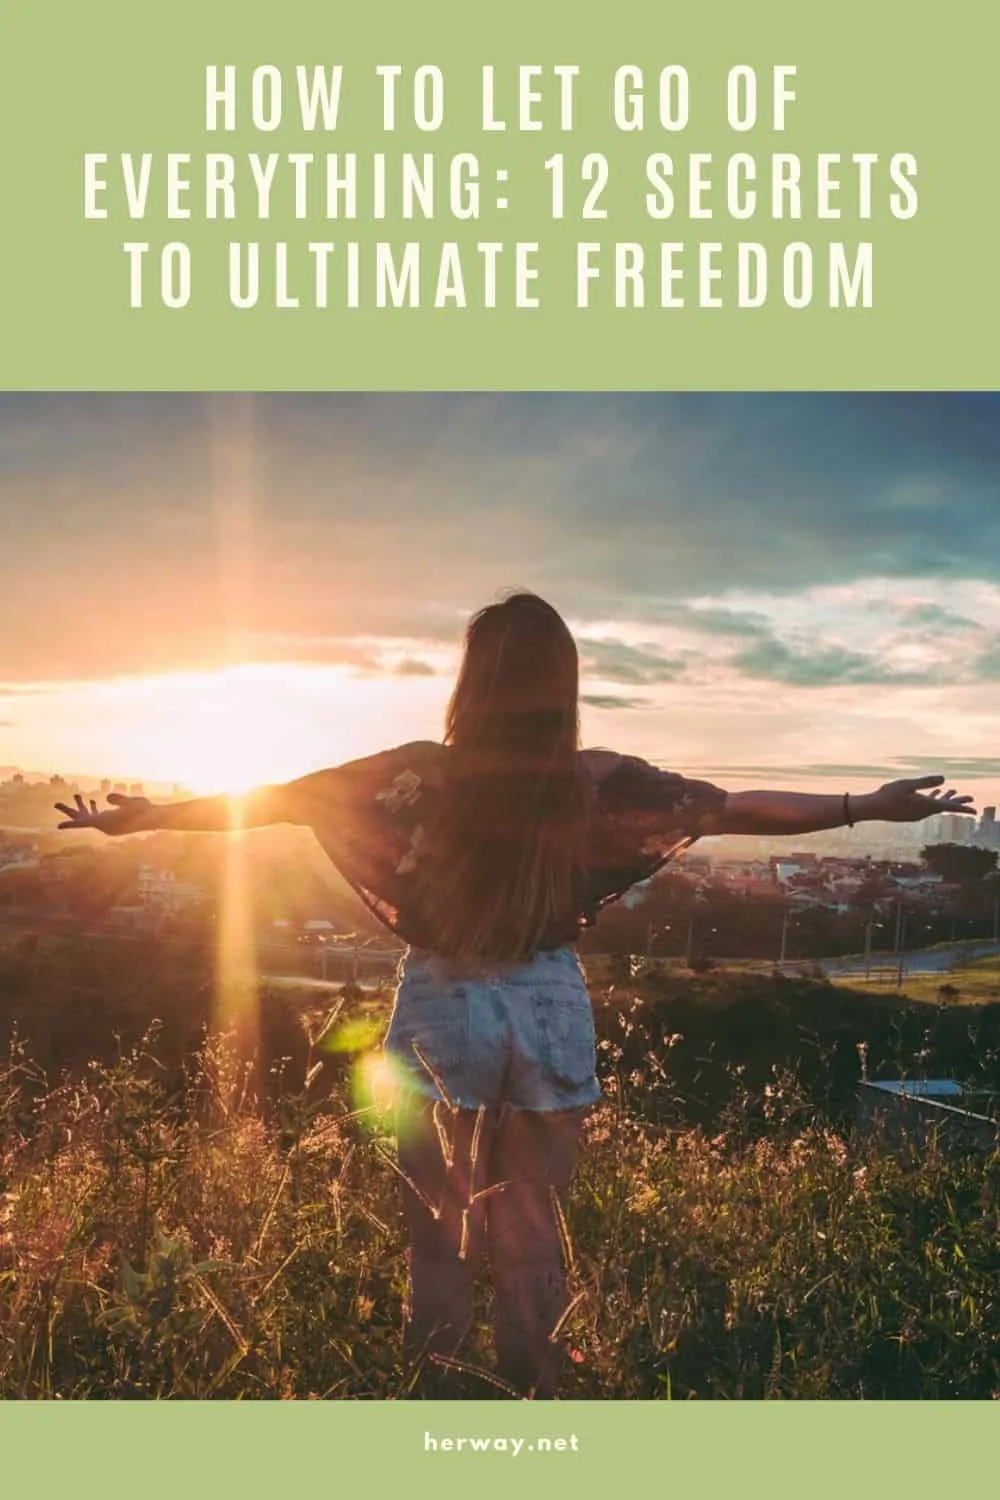 How To Let Go Of Everything: 12 Secrets To Ultimate Freedom